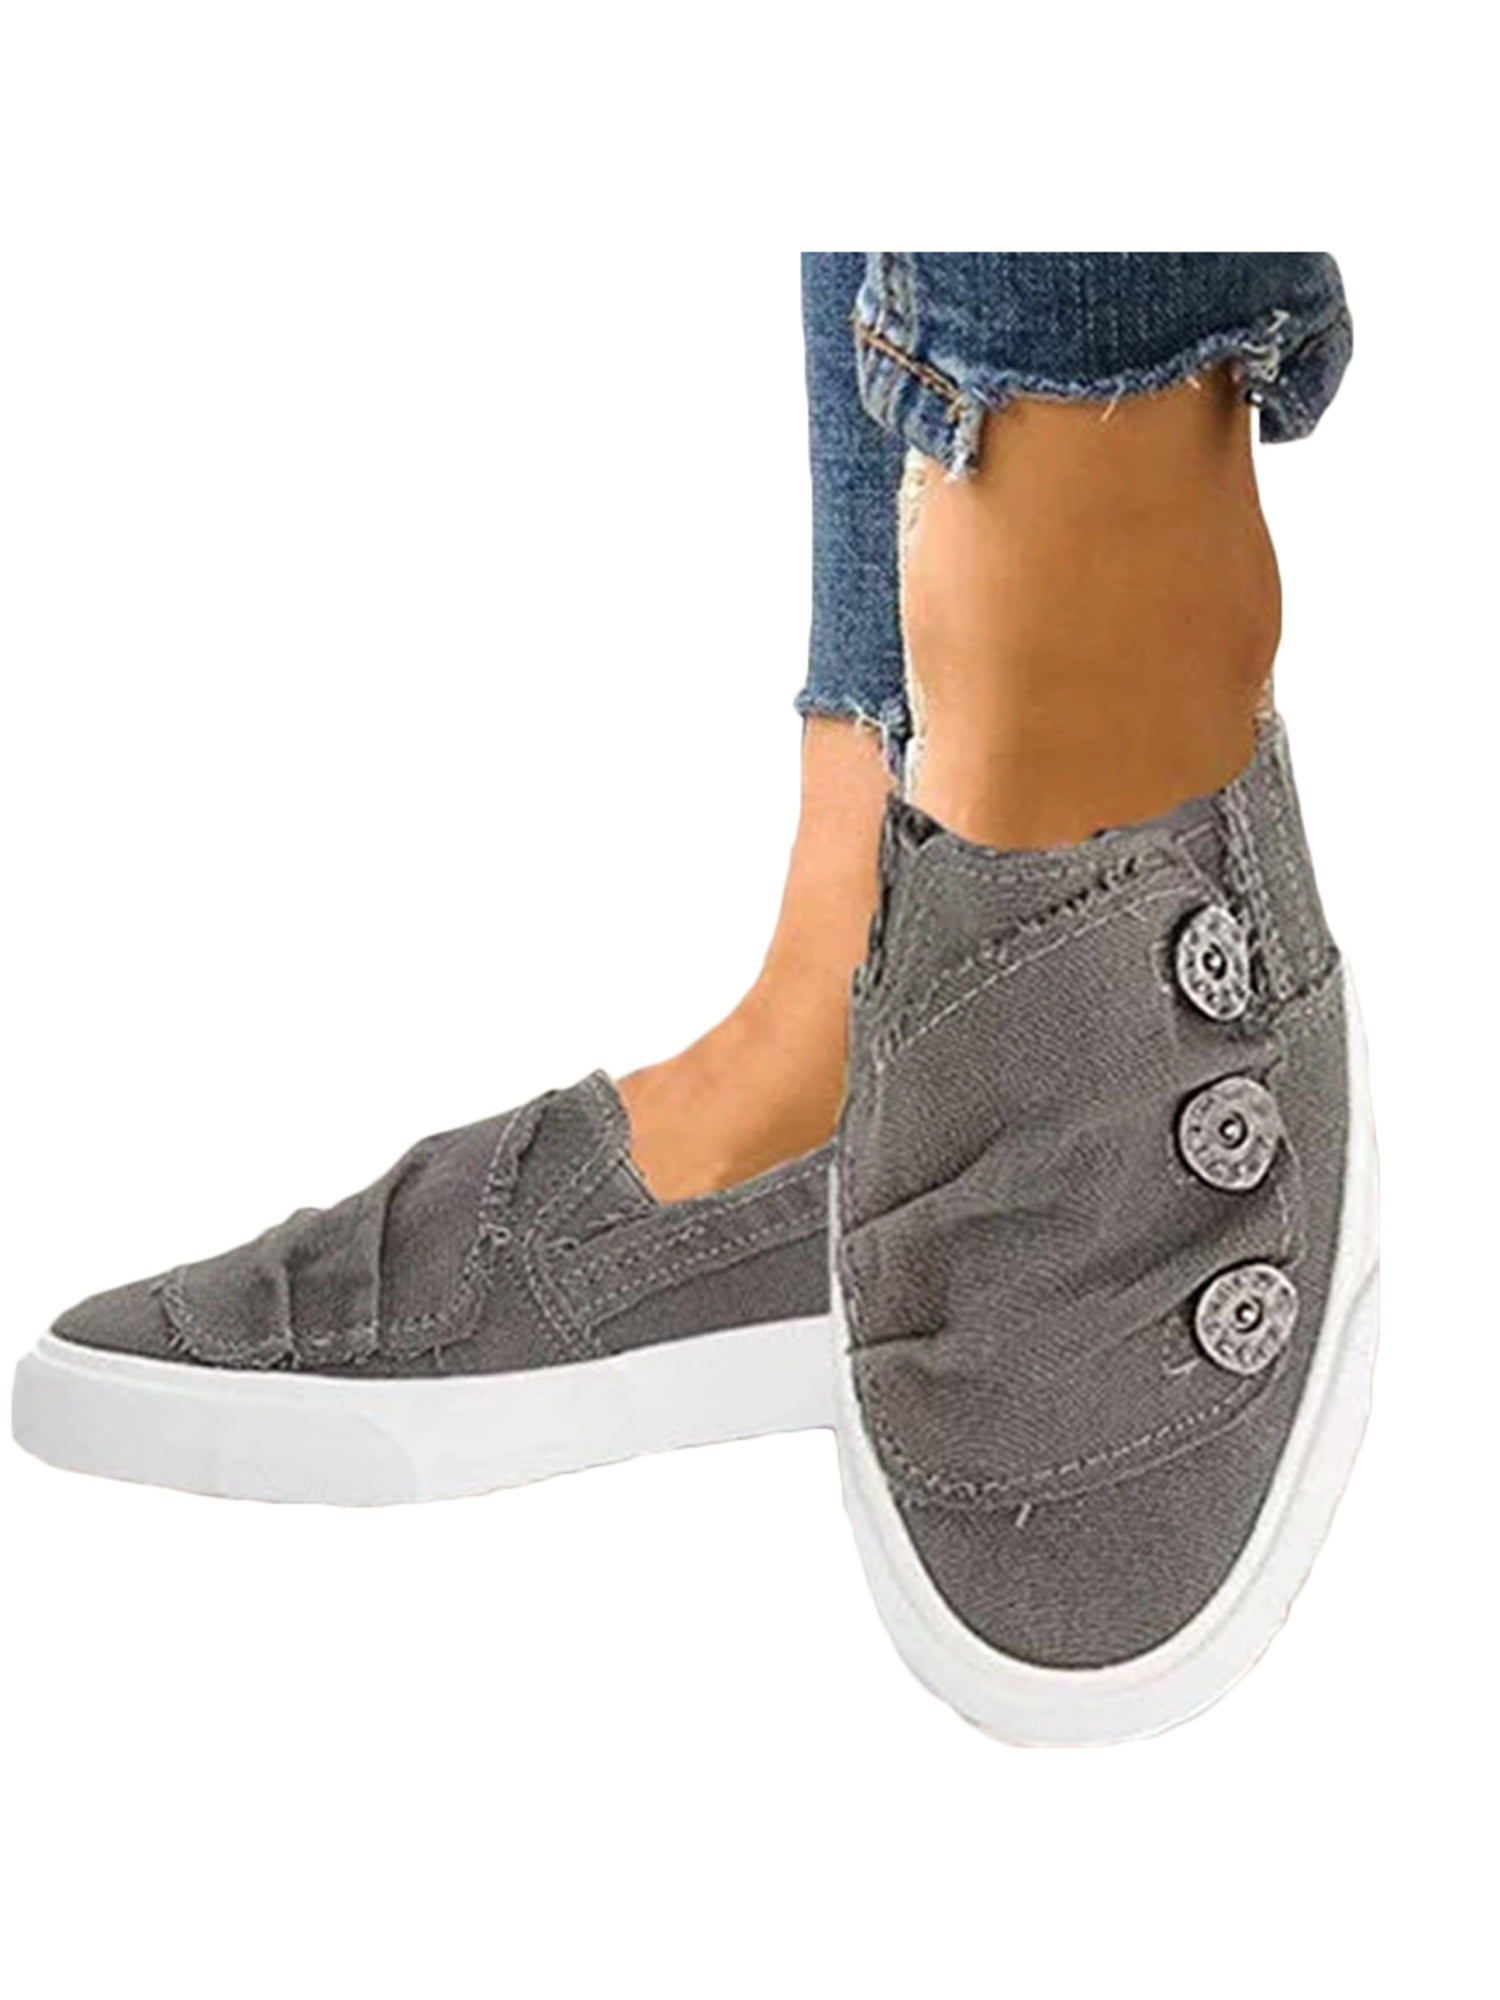 LALLC - Women's Canvas Slip On Flat Sneakers Button Round Toe Casual ...